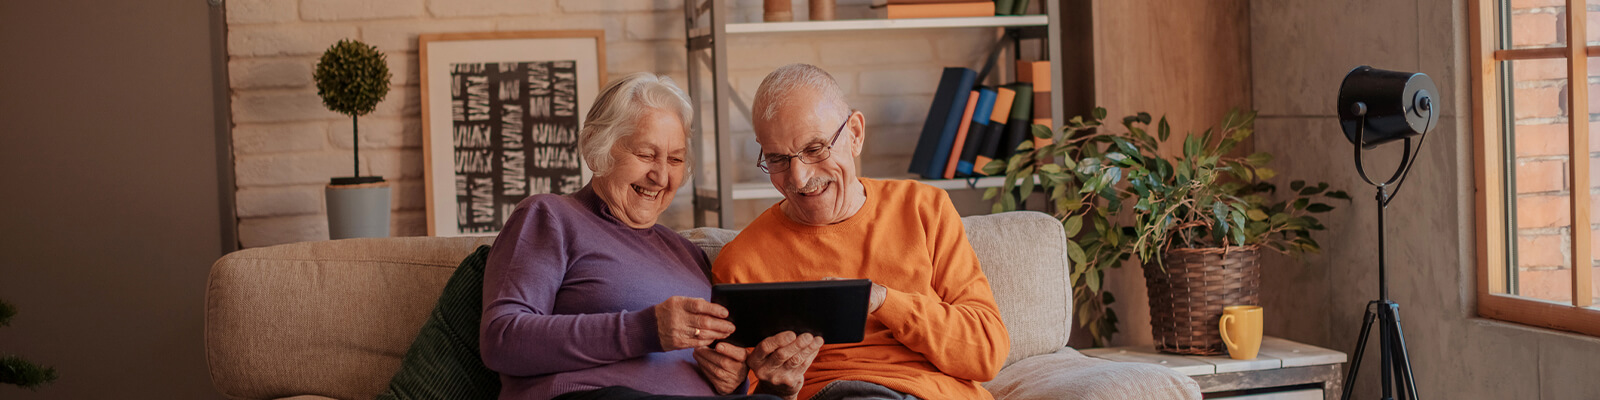 Elderly man and woman sitting on a tan couch smiling and looking at a smart tablet